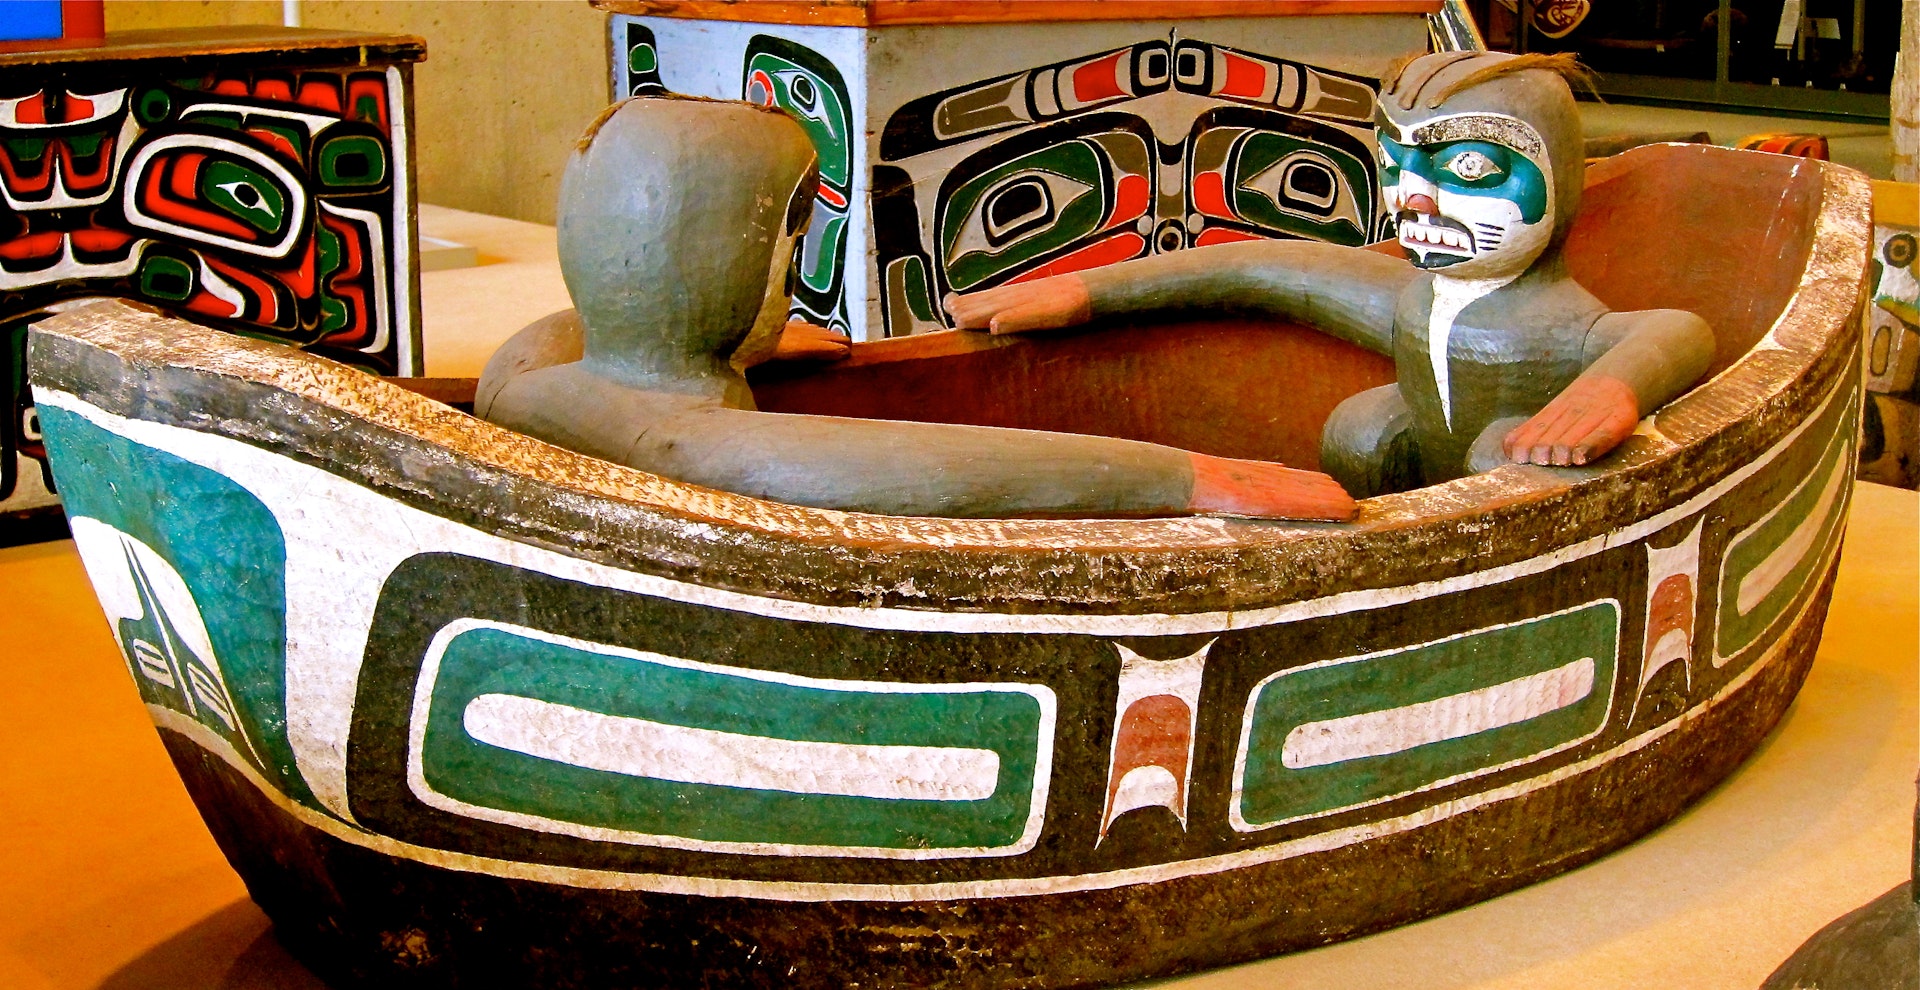 First Nations carving of two men in a boat at the Museum of Anthropology in Vancouver.